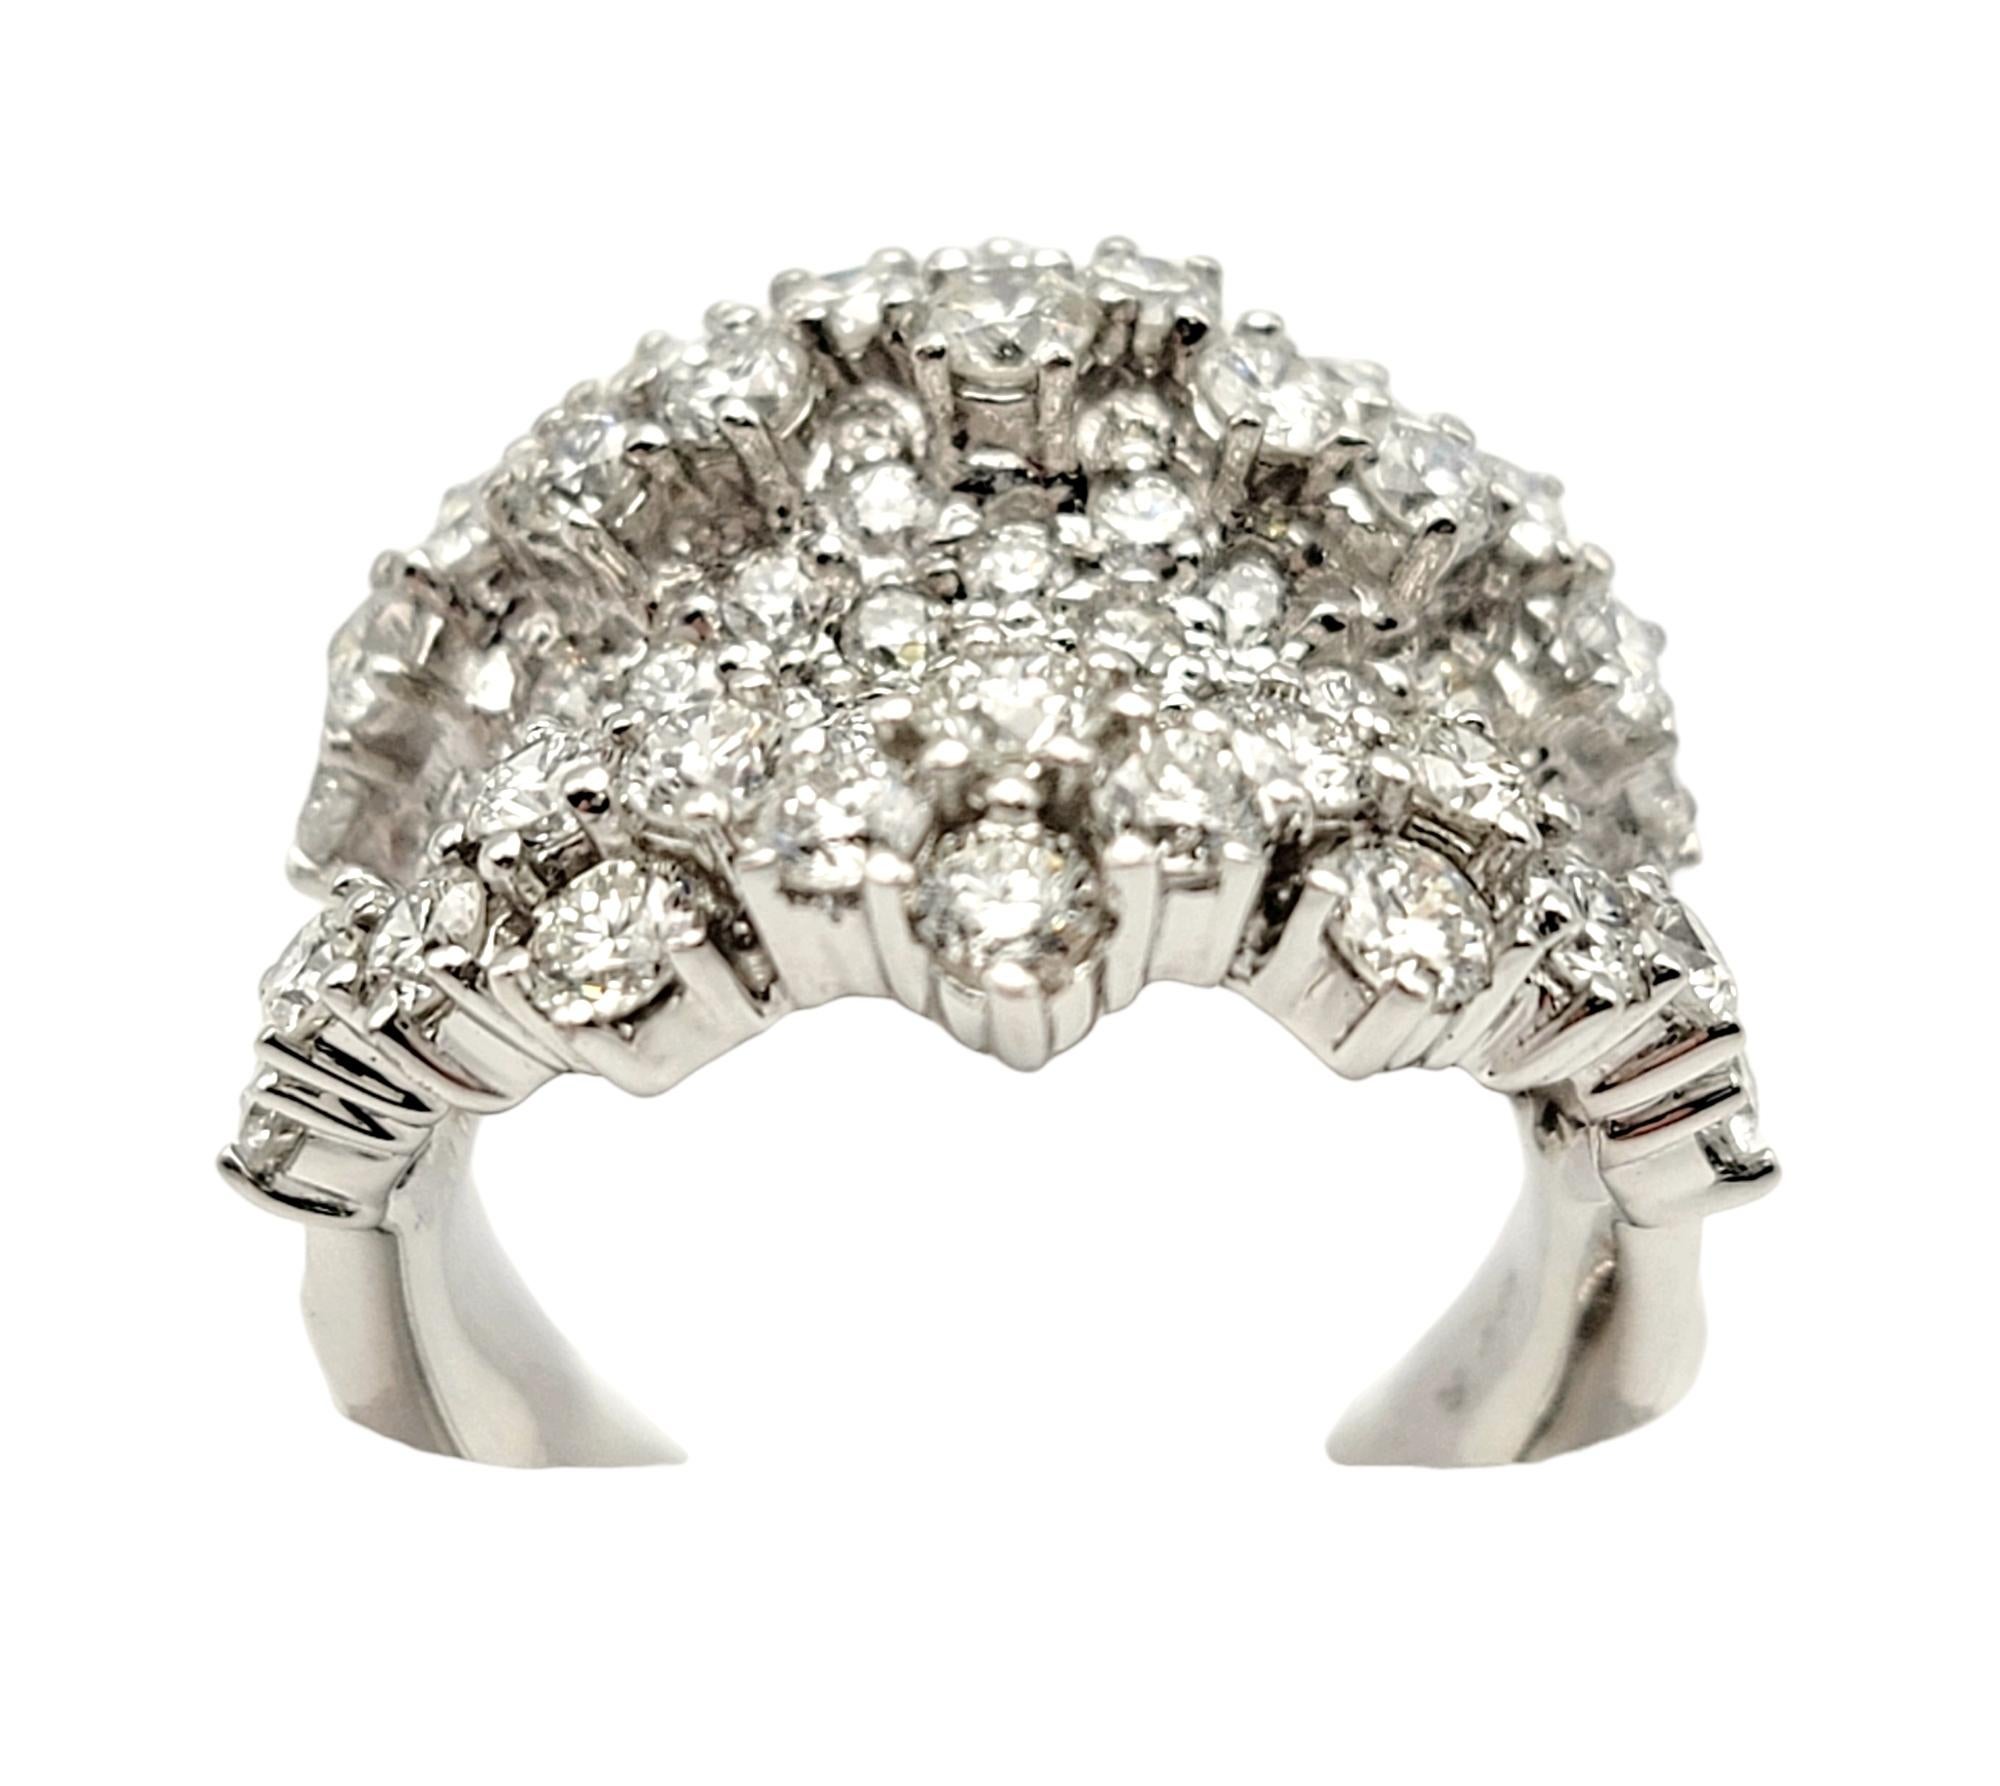 1.72 Carats Total Diamond Concave High-Low Cocktail Ring 18 Karat White Gold In Good Condition For Sale In Scottsdale, AZ